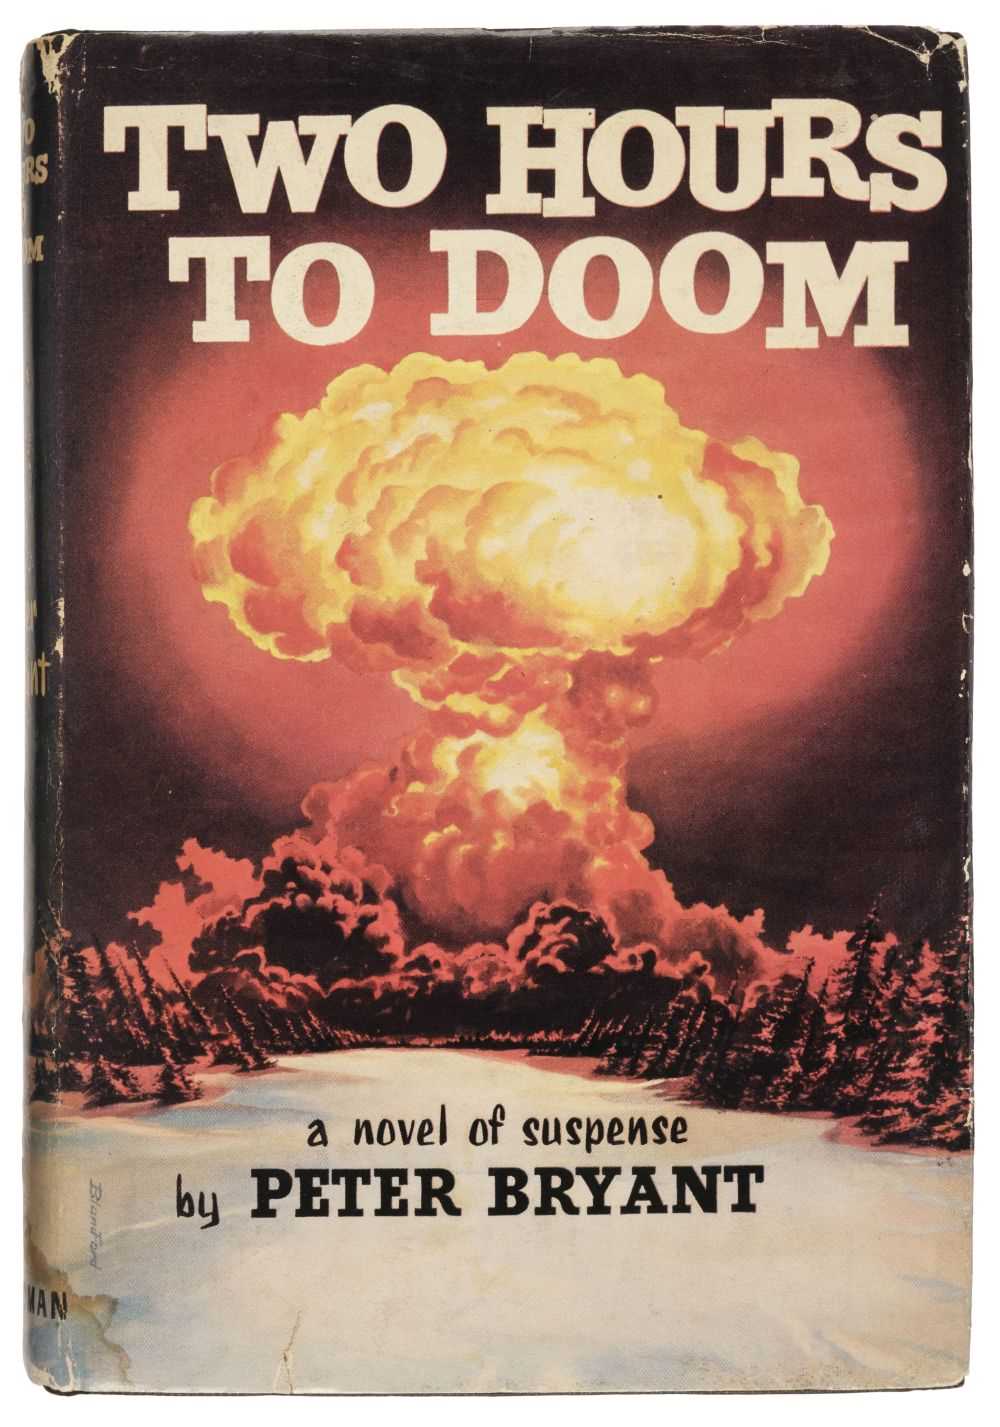 Lot 520 - Bryant (Peter). Two Hours to Doom, 1st edition, 1958